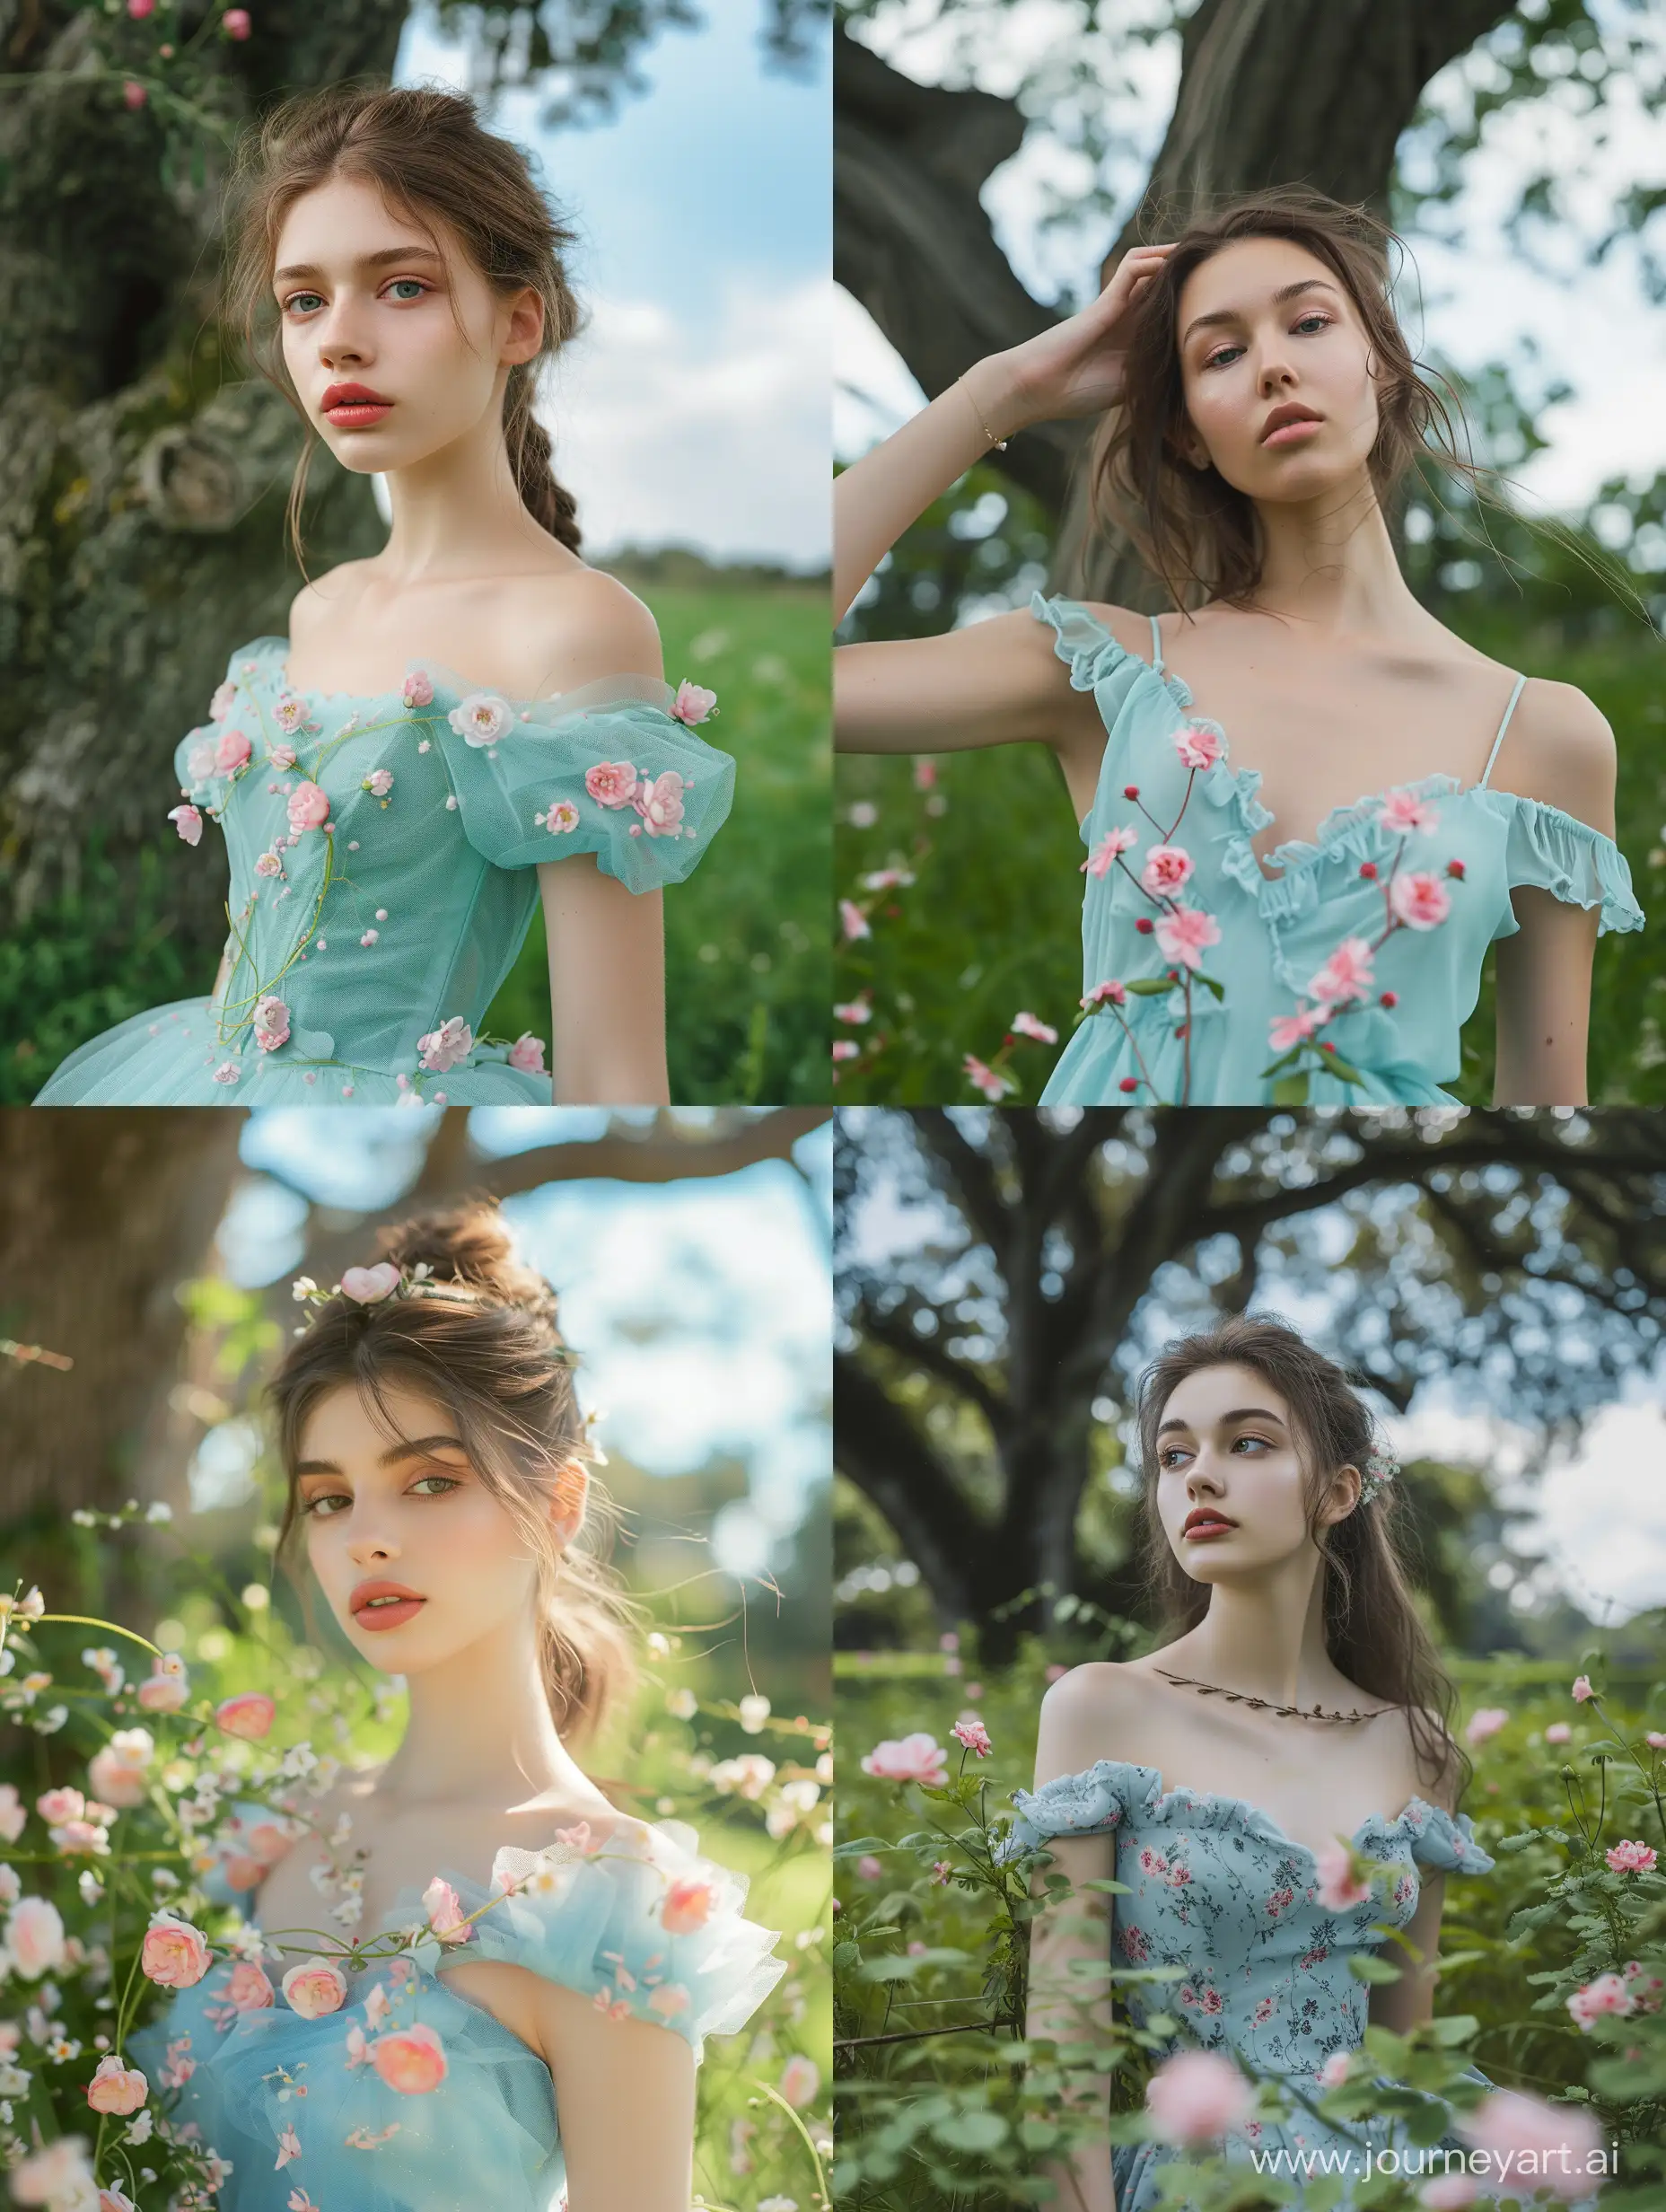 A close-up details of A beautiful, wonderful, pretty, sweet, soft model young woman wears a sky blue dress with pink flowers in a green garden with a big tree behind it in the middle of the day. Realistic. Real. Photo. 35mm.